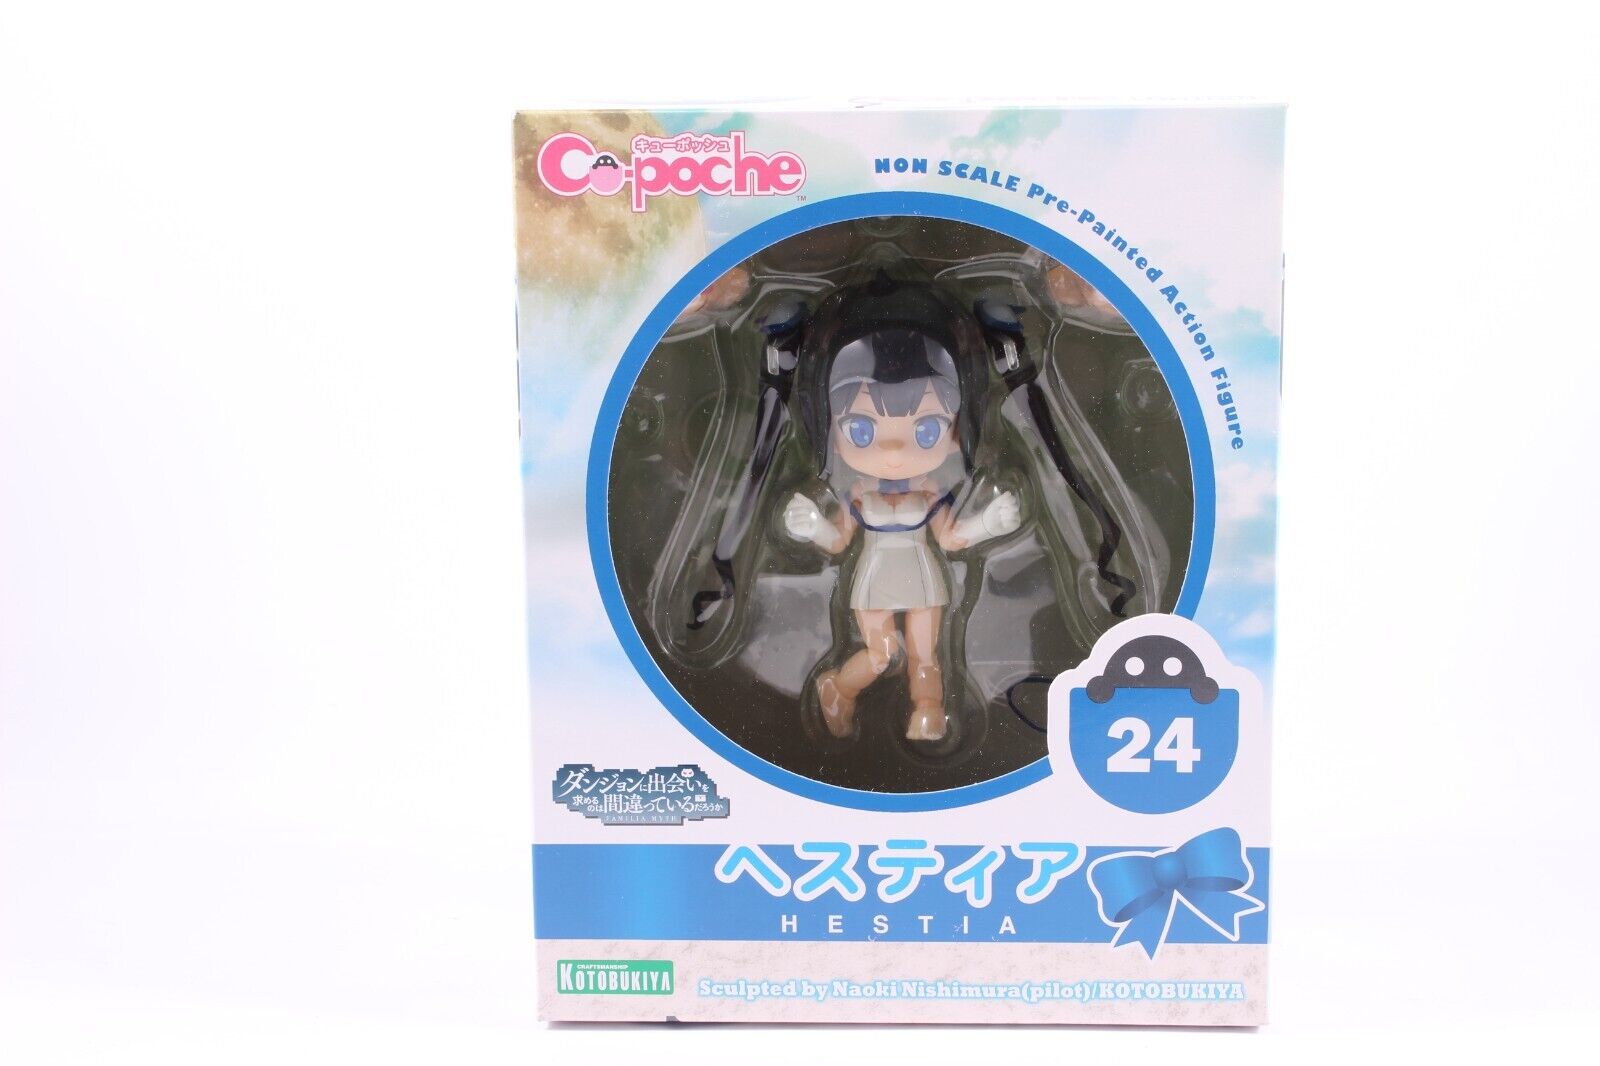 Kotobukiya Cu-poche 24 Is It Wrong to Try to Pick up Girls in a Dungeon Hestia